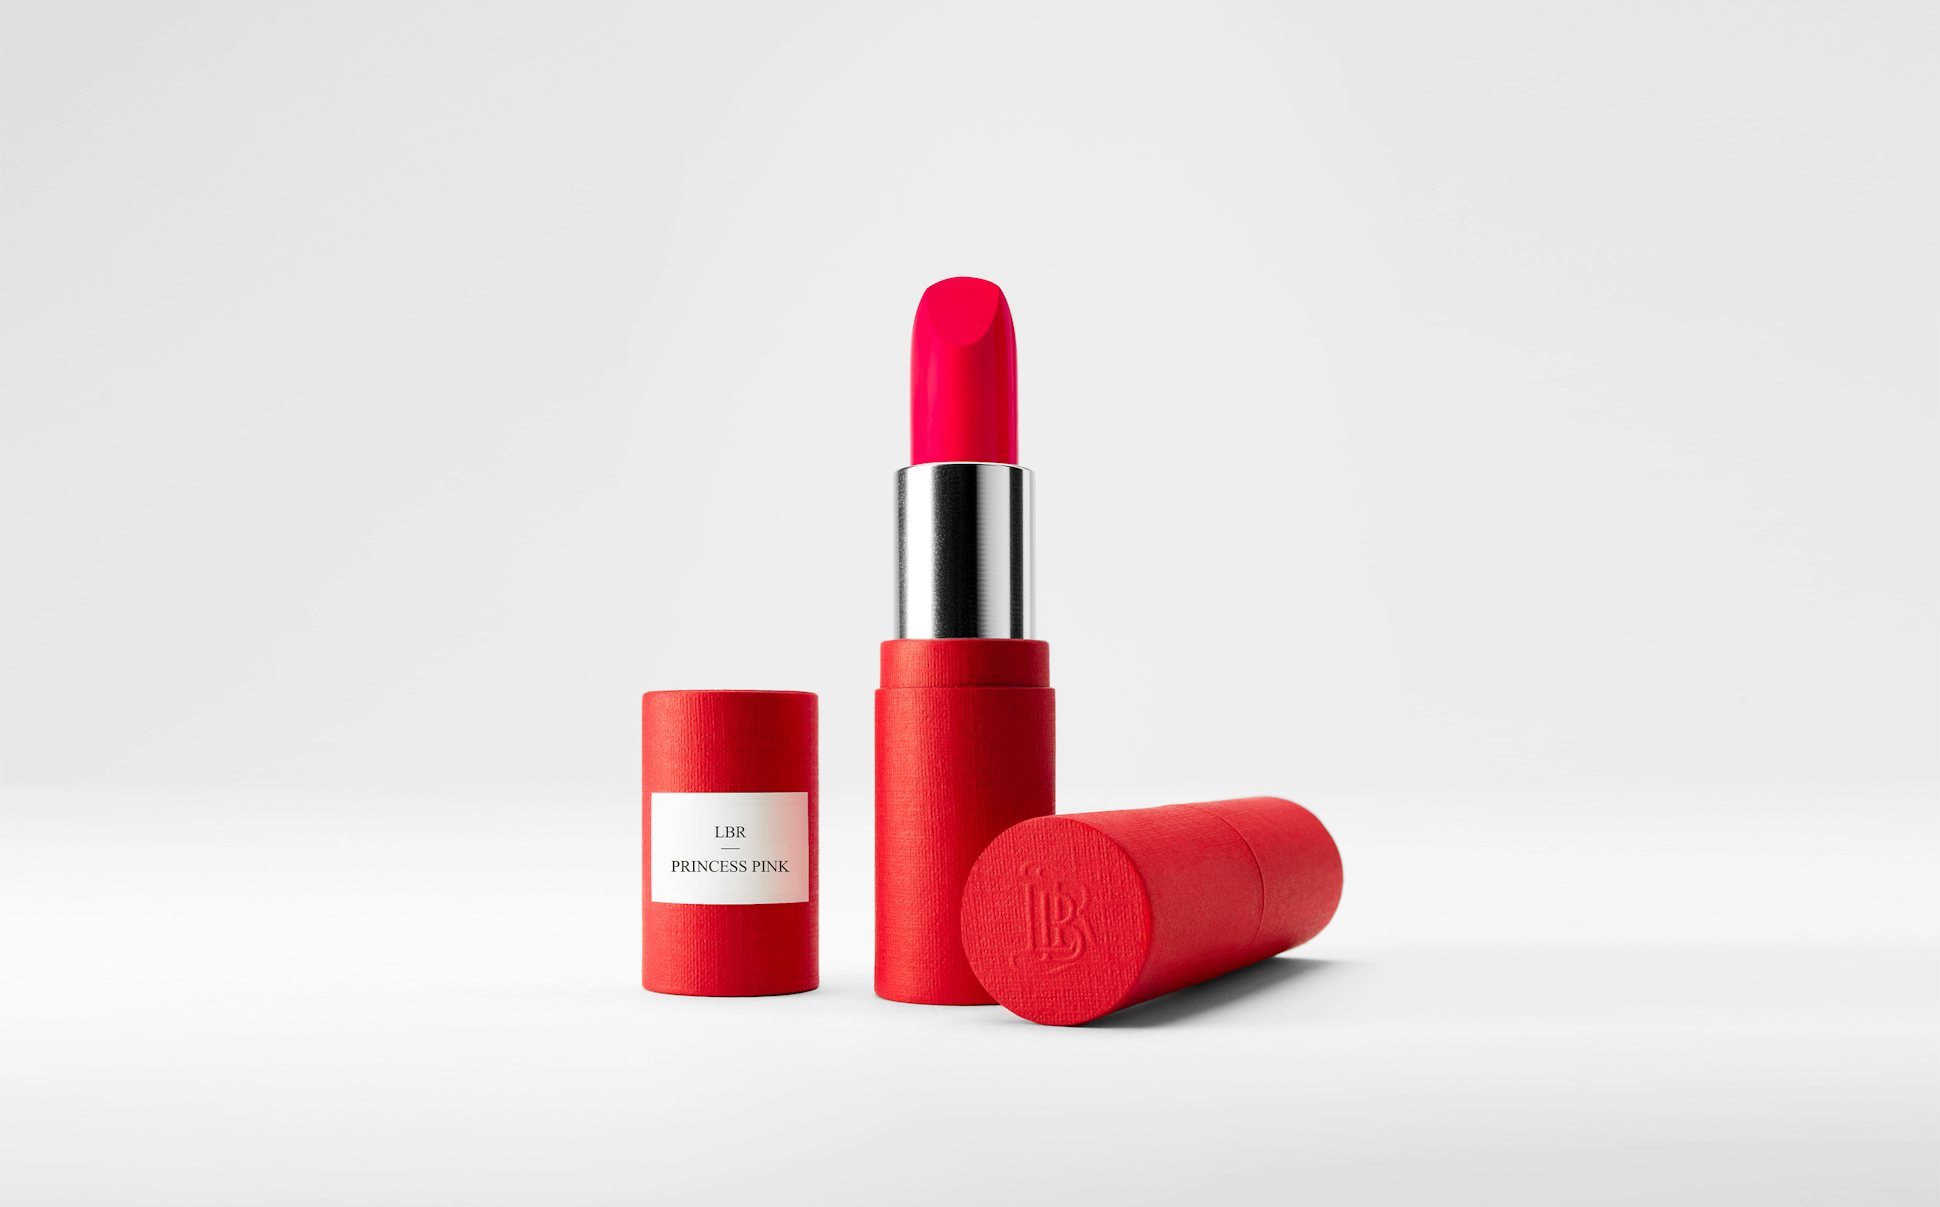 La bouche rouge Princess Pink lipstick in the red paper case